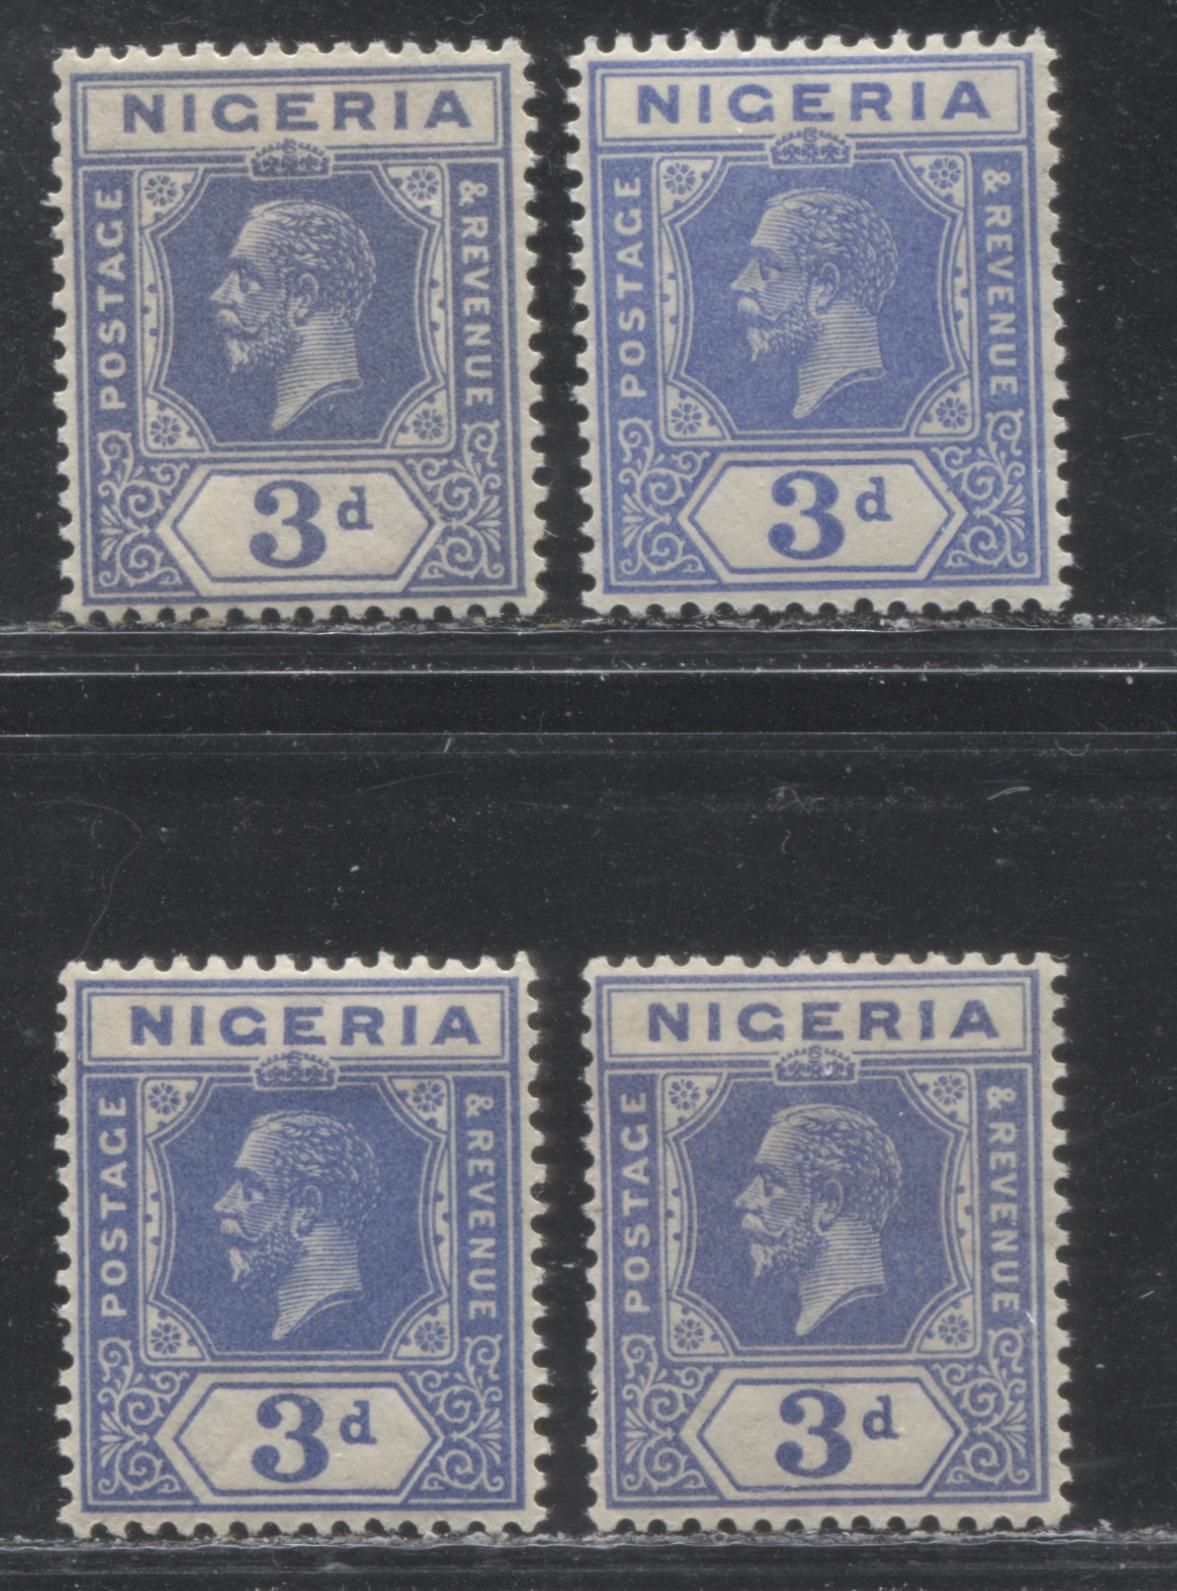 Lot 247 Nigeria SG# 23 3d Blue & Pale Blue King George V, 1921-1932 Multiple Script CA Imperium Keyplate Issue, Four VFOG Examples, Die 2, All From Different Printings, With Different Head and Duty Plate Shades